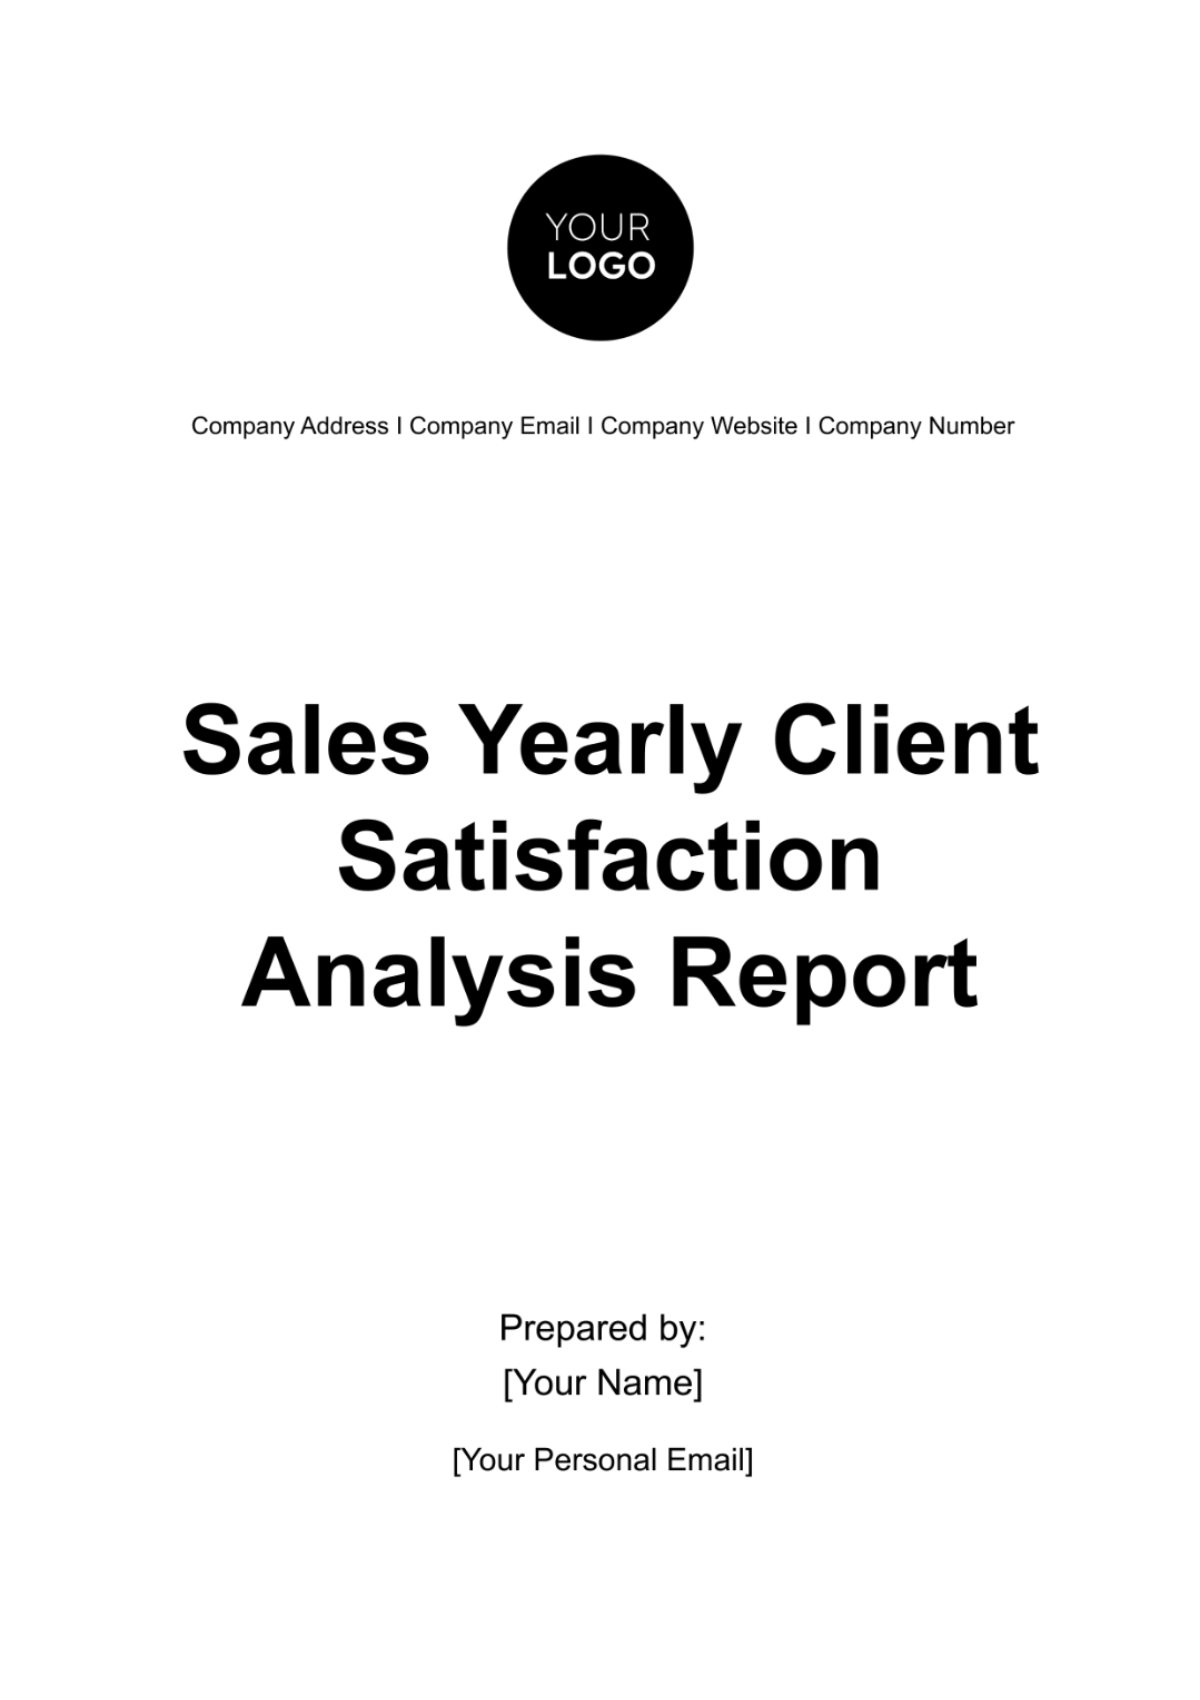 Free Sales Yearly Client Satisfaction Analysis Report Template